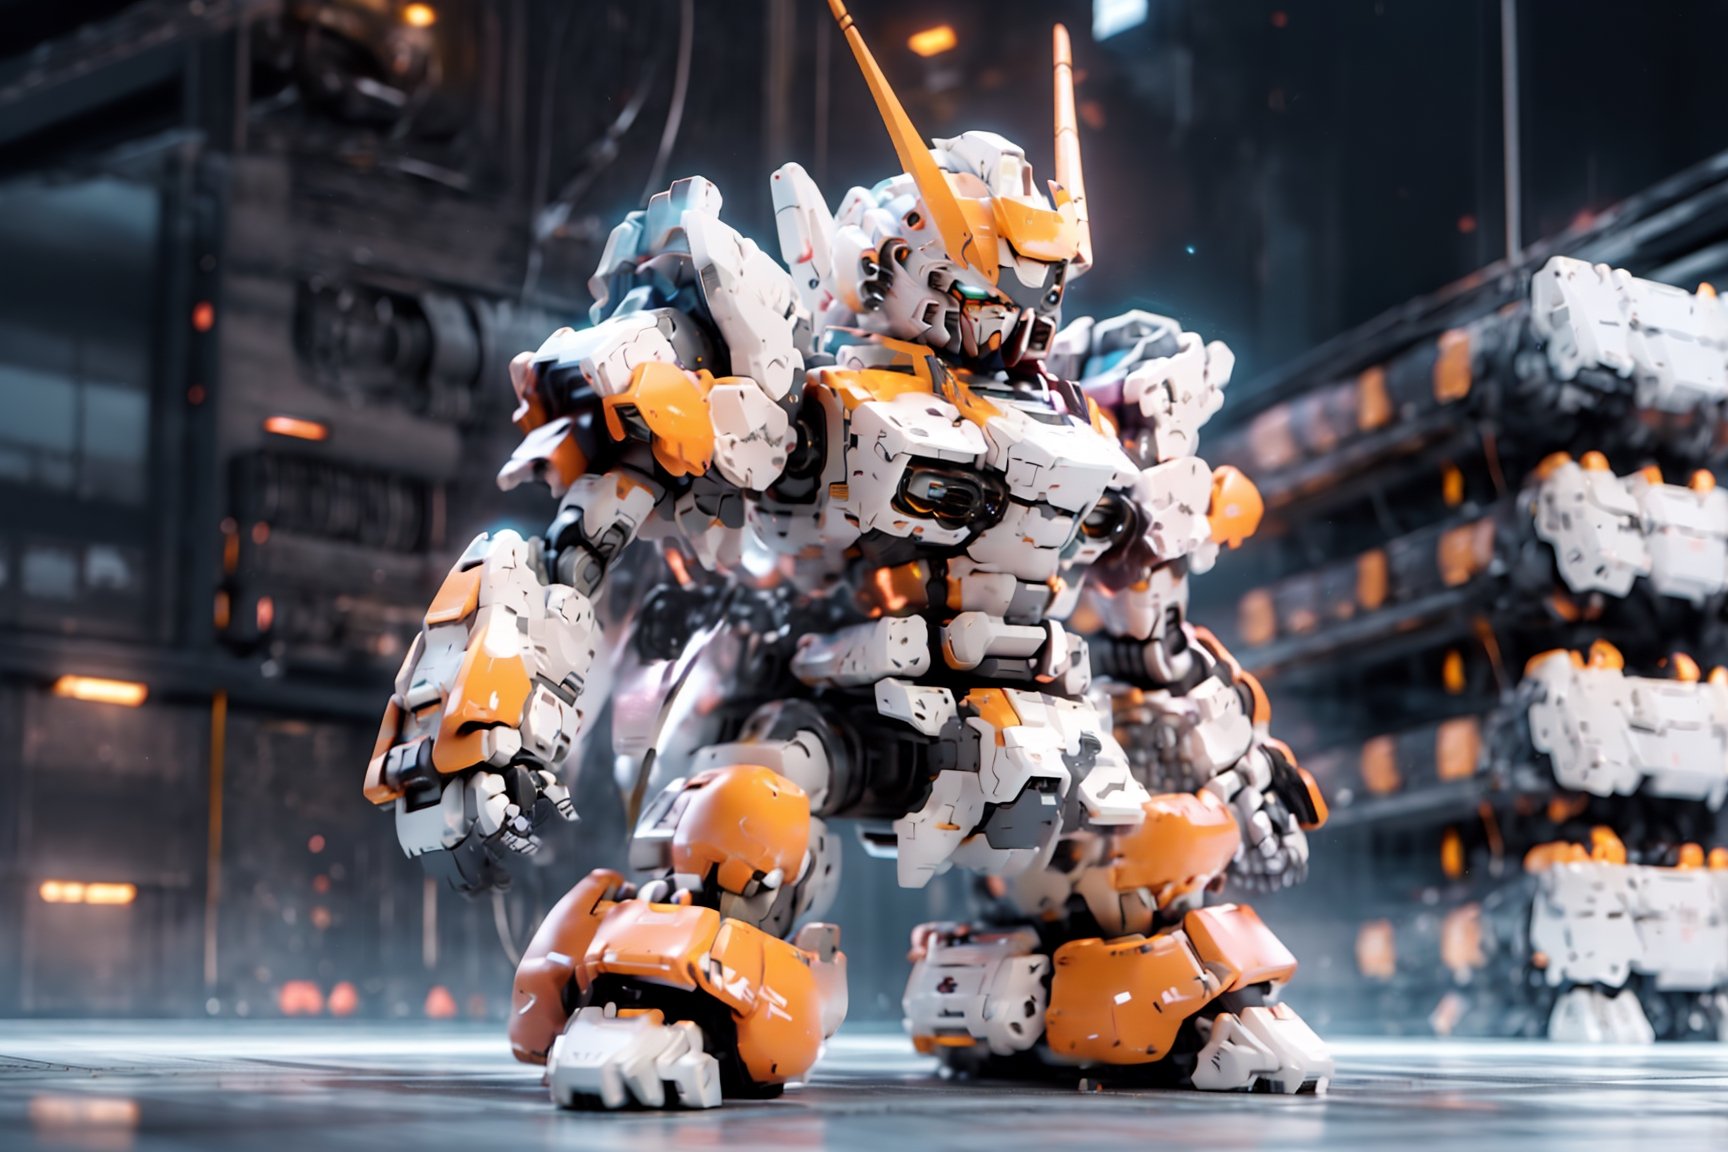 Best quality, masterpiece,  strong contrast,  high level of detail, Best quality, masterpiece,  16k wallpaper,  concept art,  high level of detail,  strong contrast, 
BREAK

BJ_Cute_Mech, 1 bipedal mech,  solo,  perfect chibi full body mech,  mech in distance,  mechanical face,  mech face in detail,  huge mechanical head in detail,  hard surface face,  two huge jade eyes like camera lends,  holding,   perfect chibi full body, extremely small torso,  weapon,  chibi,  holding_weapon,  gun, blush_stickers,  helmet, holding_gun,  android,  joints,  robot_joints,  orange rivet on joints,  hard surface,  heavy armored head and body, heavy armored arms and legs, the mech is white and orange in color,  it has a round head and a triangular visor,  the mech’s head is small,  the mech’s head is integrated with the mech’s body,  no neck,  The mech’s body is a white oval-shaped box,  the box is connected to the mech’s head and shoulders,  the box has an orange line on the front,  the line separates the mech’s chest and abdomen,  the box has an orange circular part on the side,  the part separates the mech’s waist and abdomen, standing pose,  

steampunk battle field  background,  depths of deep field, 

cinematic lighting, ,BJ_Cute_Mech,High detailed ,BJ_Gundam, BJ_Gundam,QRobot